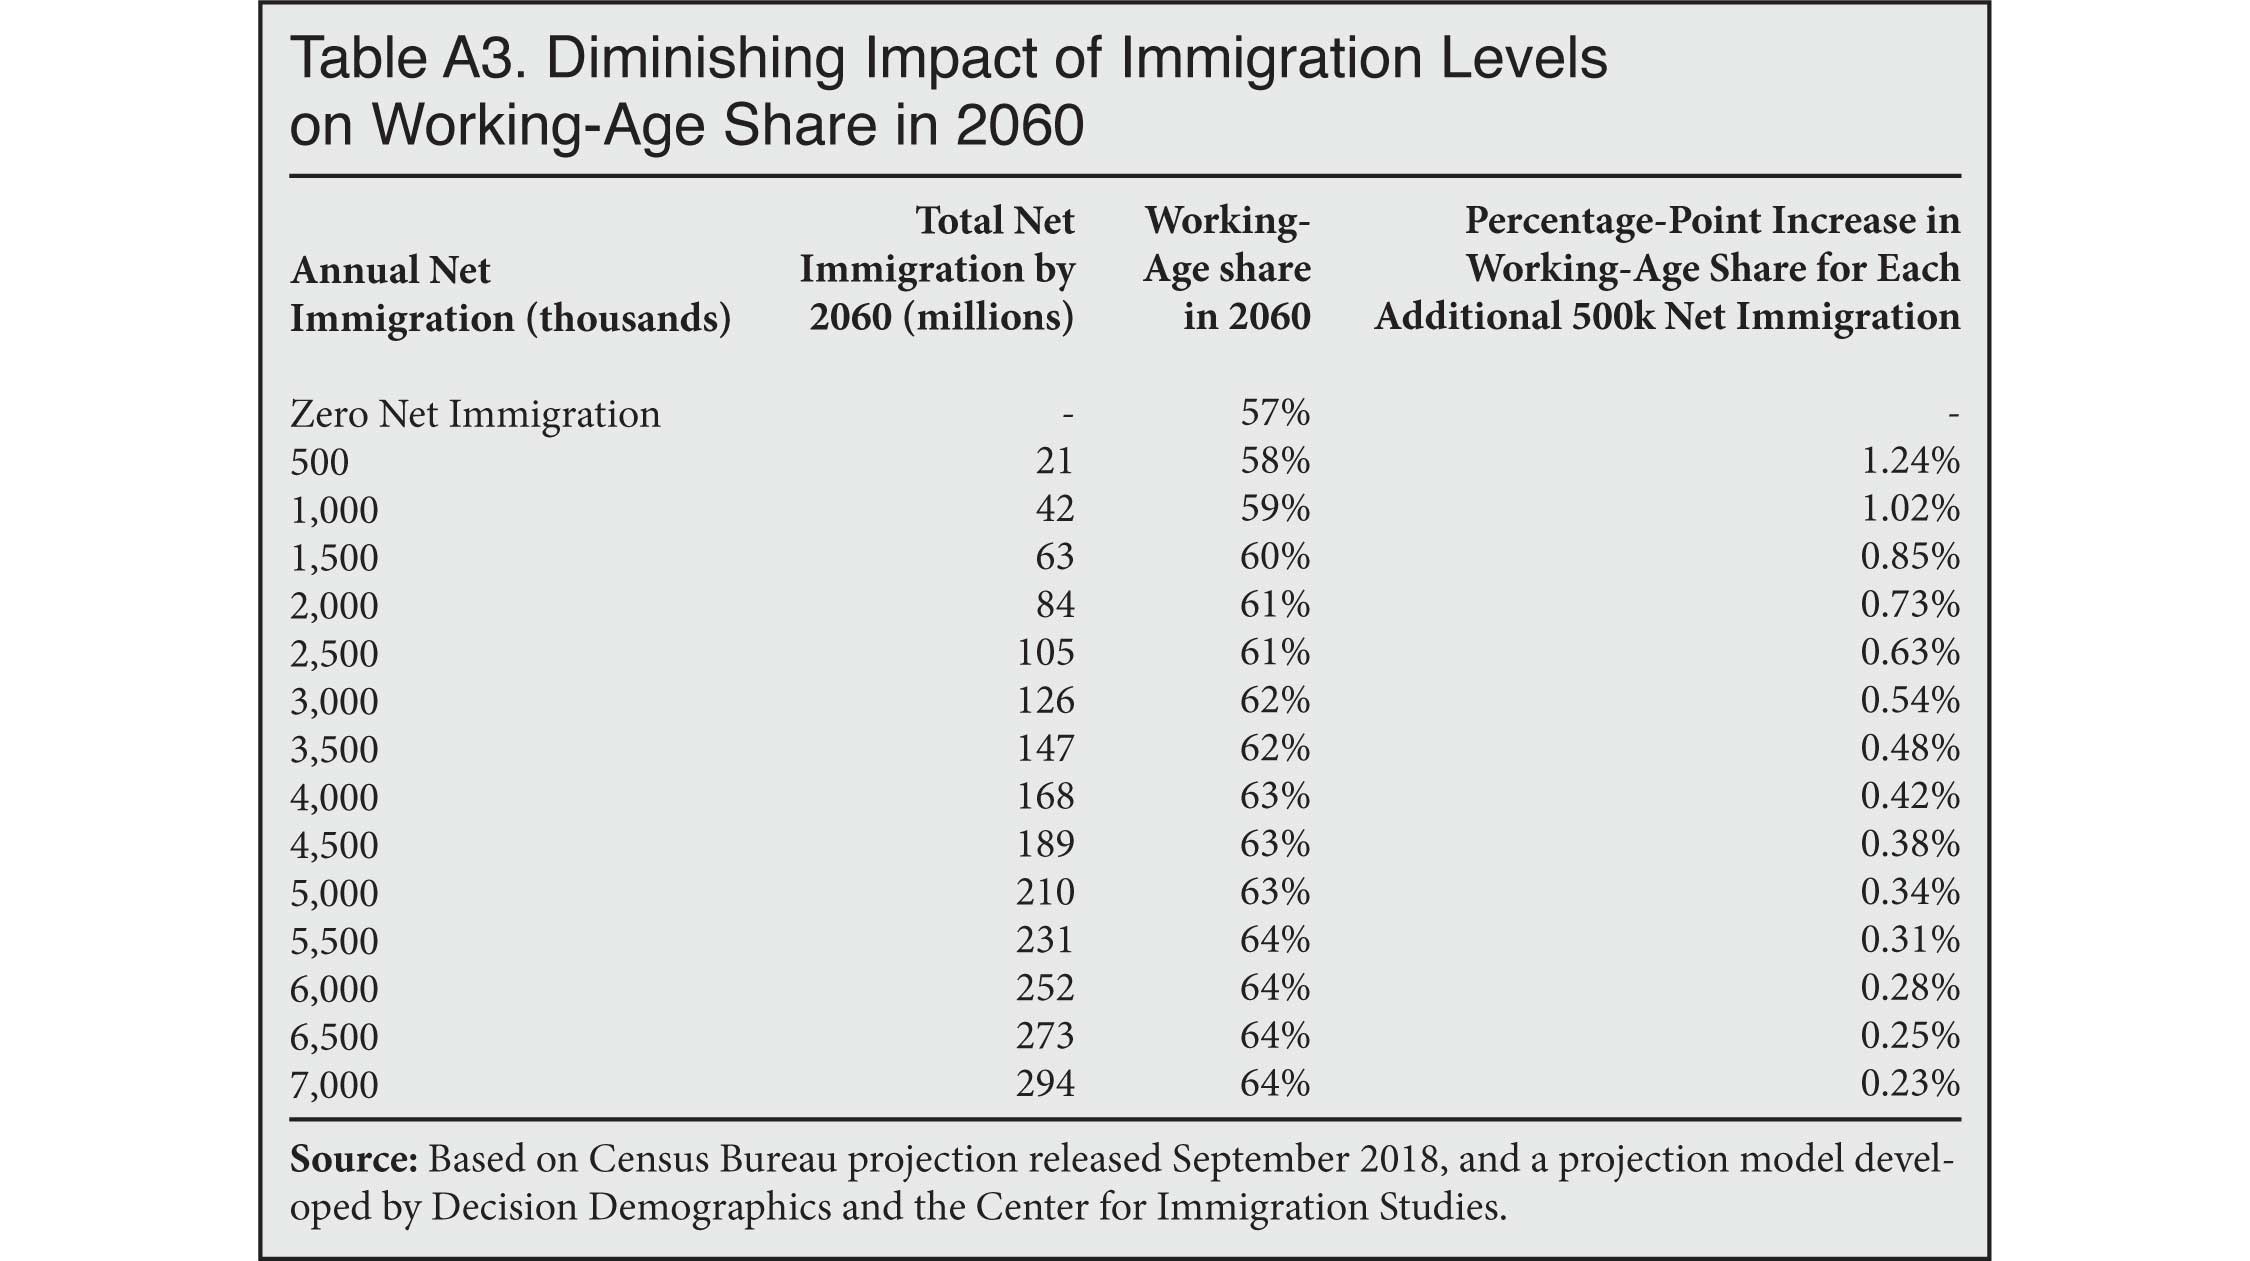 Table: Diminishing Impact of Immigration Levels on Working Age Share in 2060